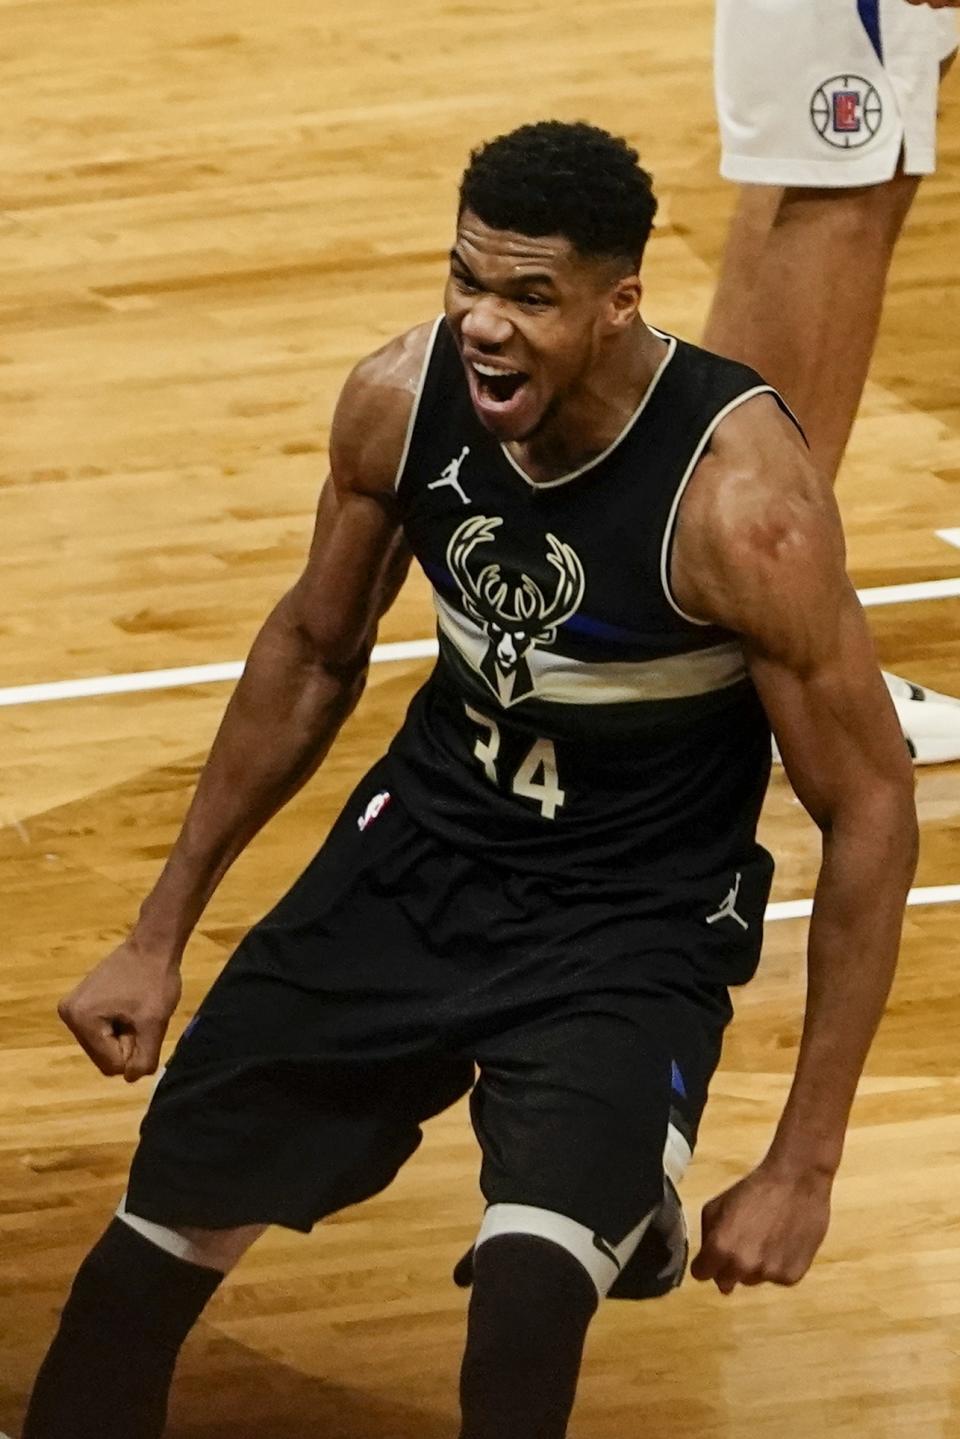 Milwaukee Bucks' Giannis Antetokounmpo reacts after dunking during the second half of an NBA basketball game against the LA Clippers Sunday, Feb. 28, 2021, in Milwaukee. The Bucks won 105-100. (AP Photo/Morry Gash)